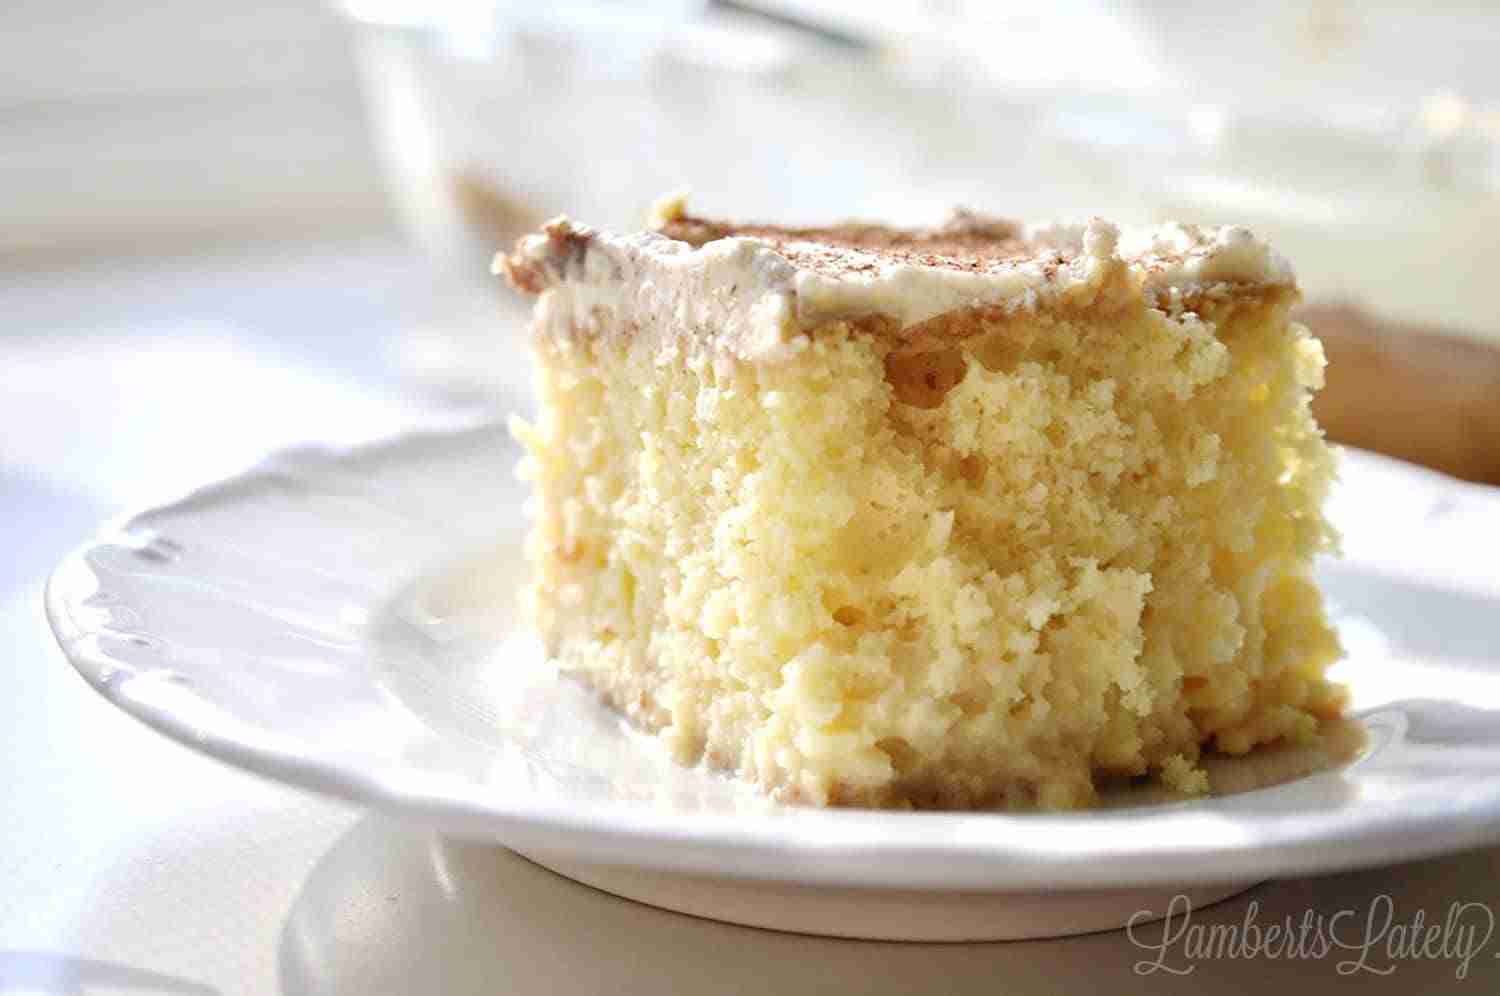 Need a shortcut recipe for Tres Leches Cake? This post shows you how to make it the easy way, with simple ingredients like boxed cake mix.